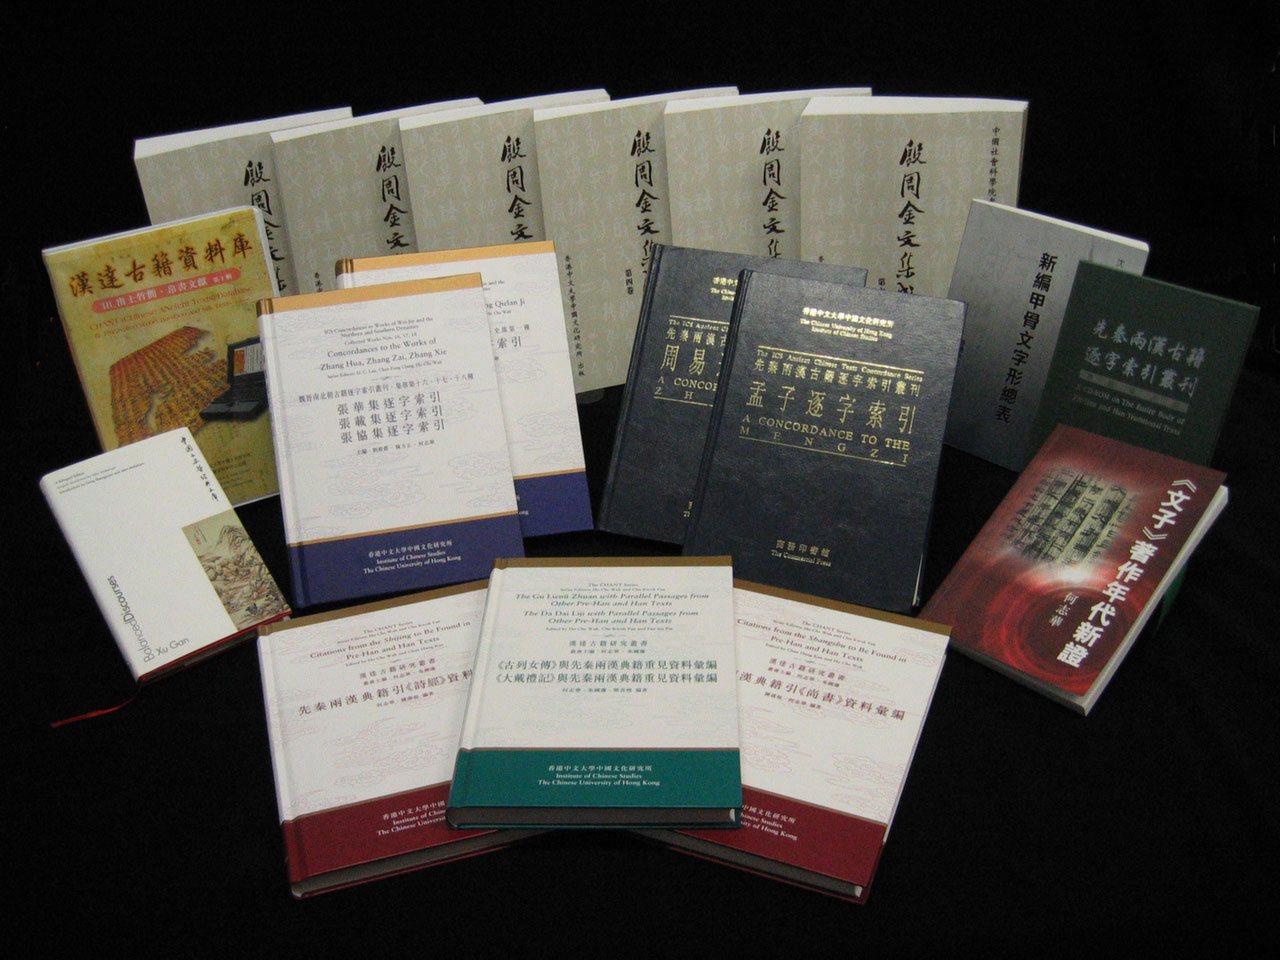 Publications of D.C. Lau Research Centre for Chinese Ancient Texts